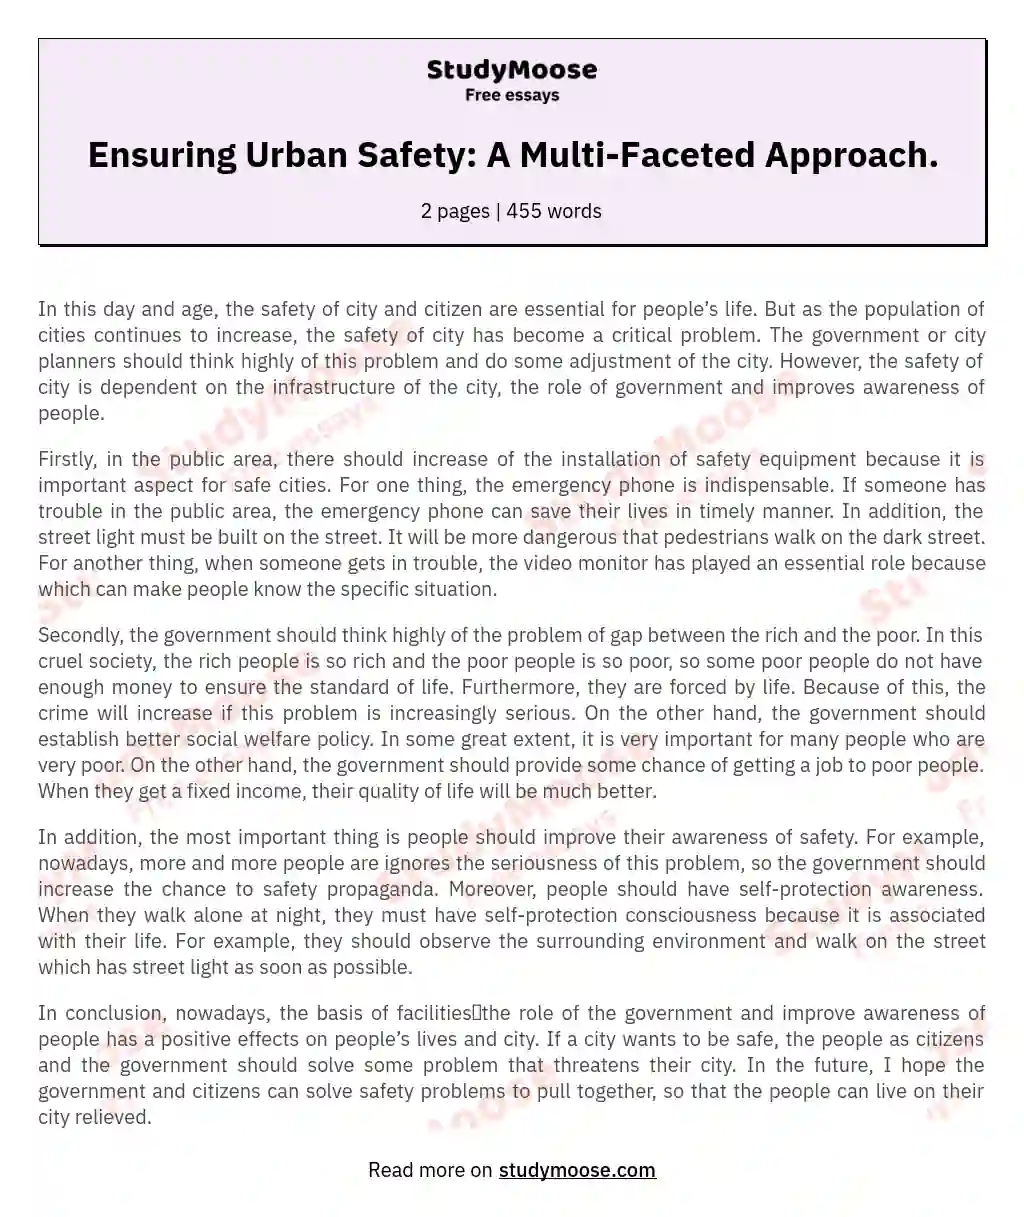 Ensuring Urban Safety: A Multi-Faceted Approach.